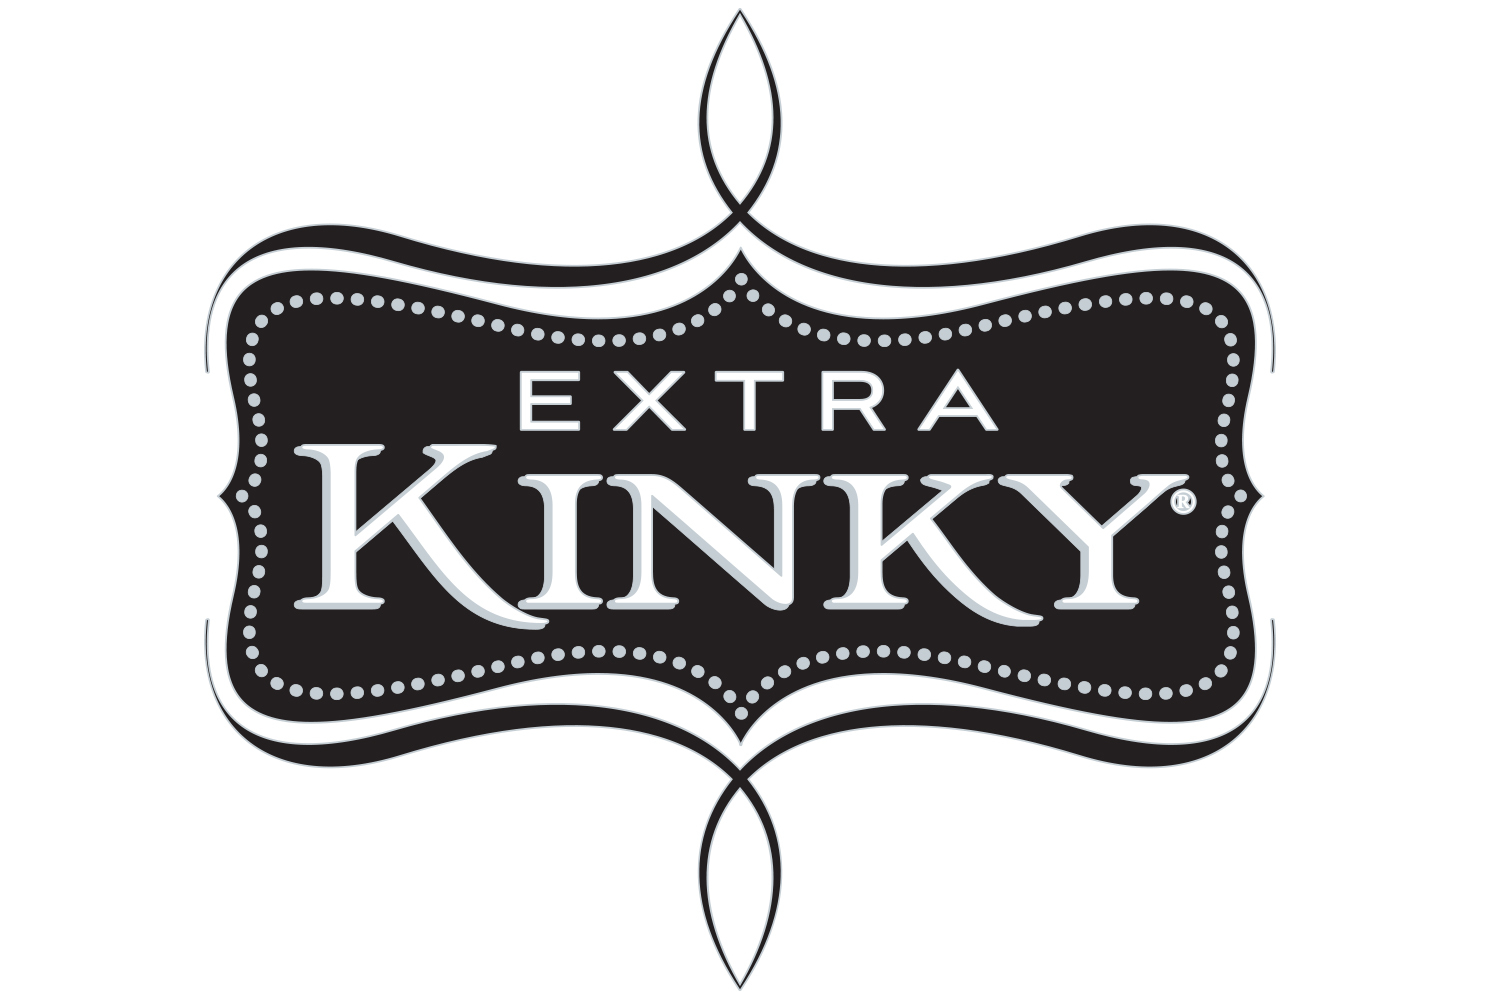 EXTRA KINKY Cocktails in Cans Taking Shelves by Storm Business W image